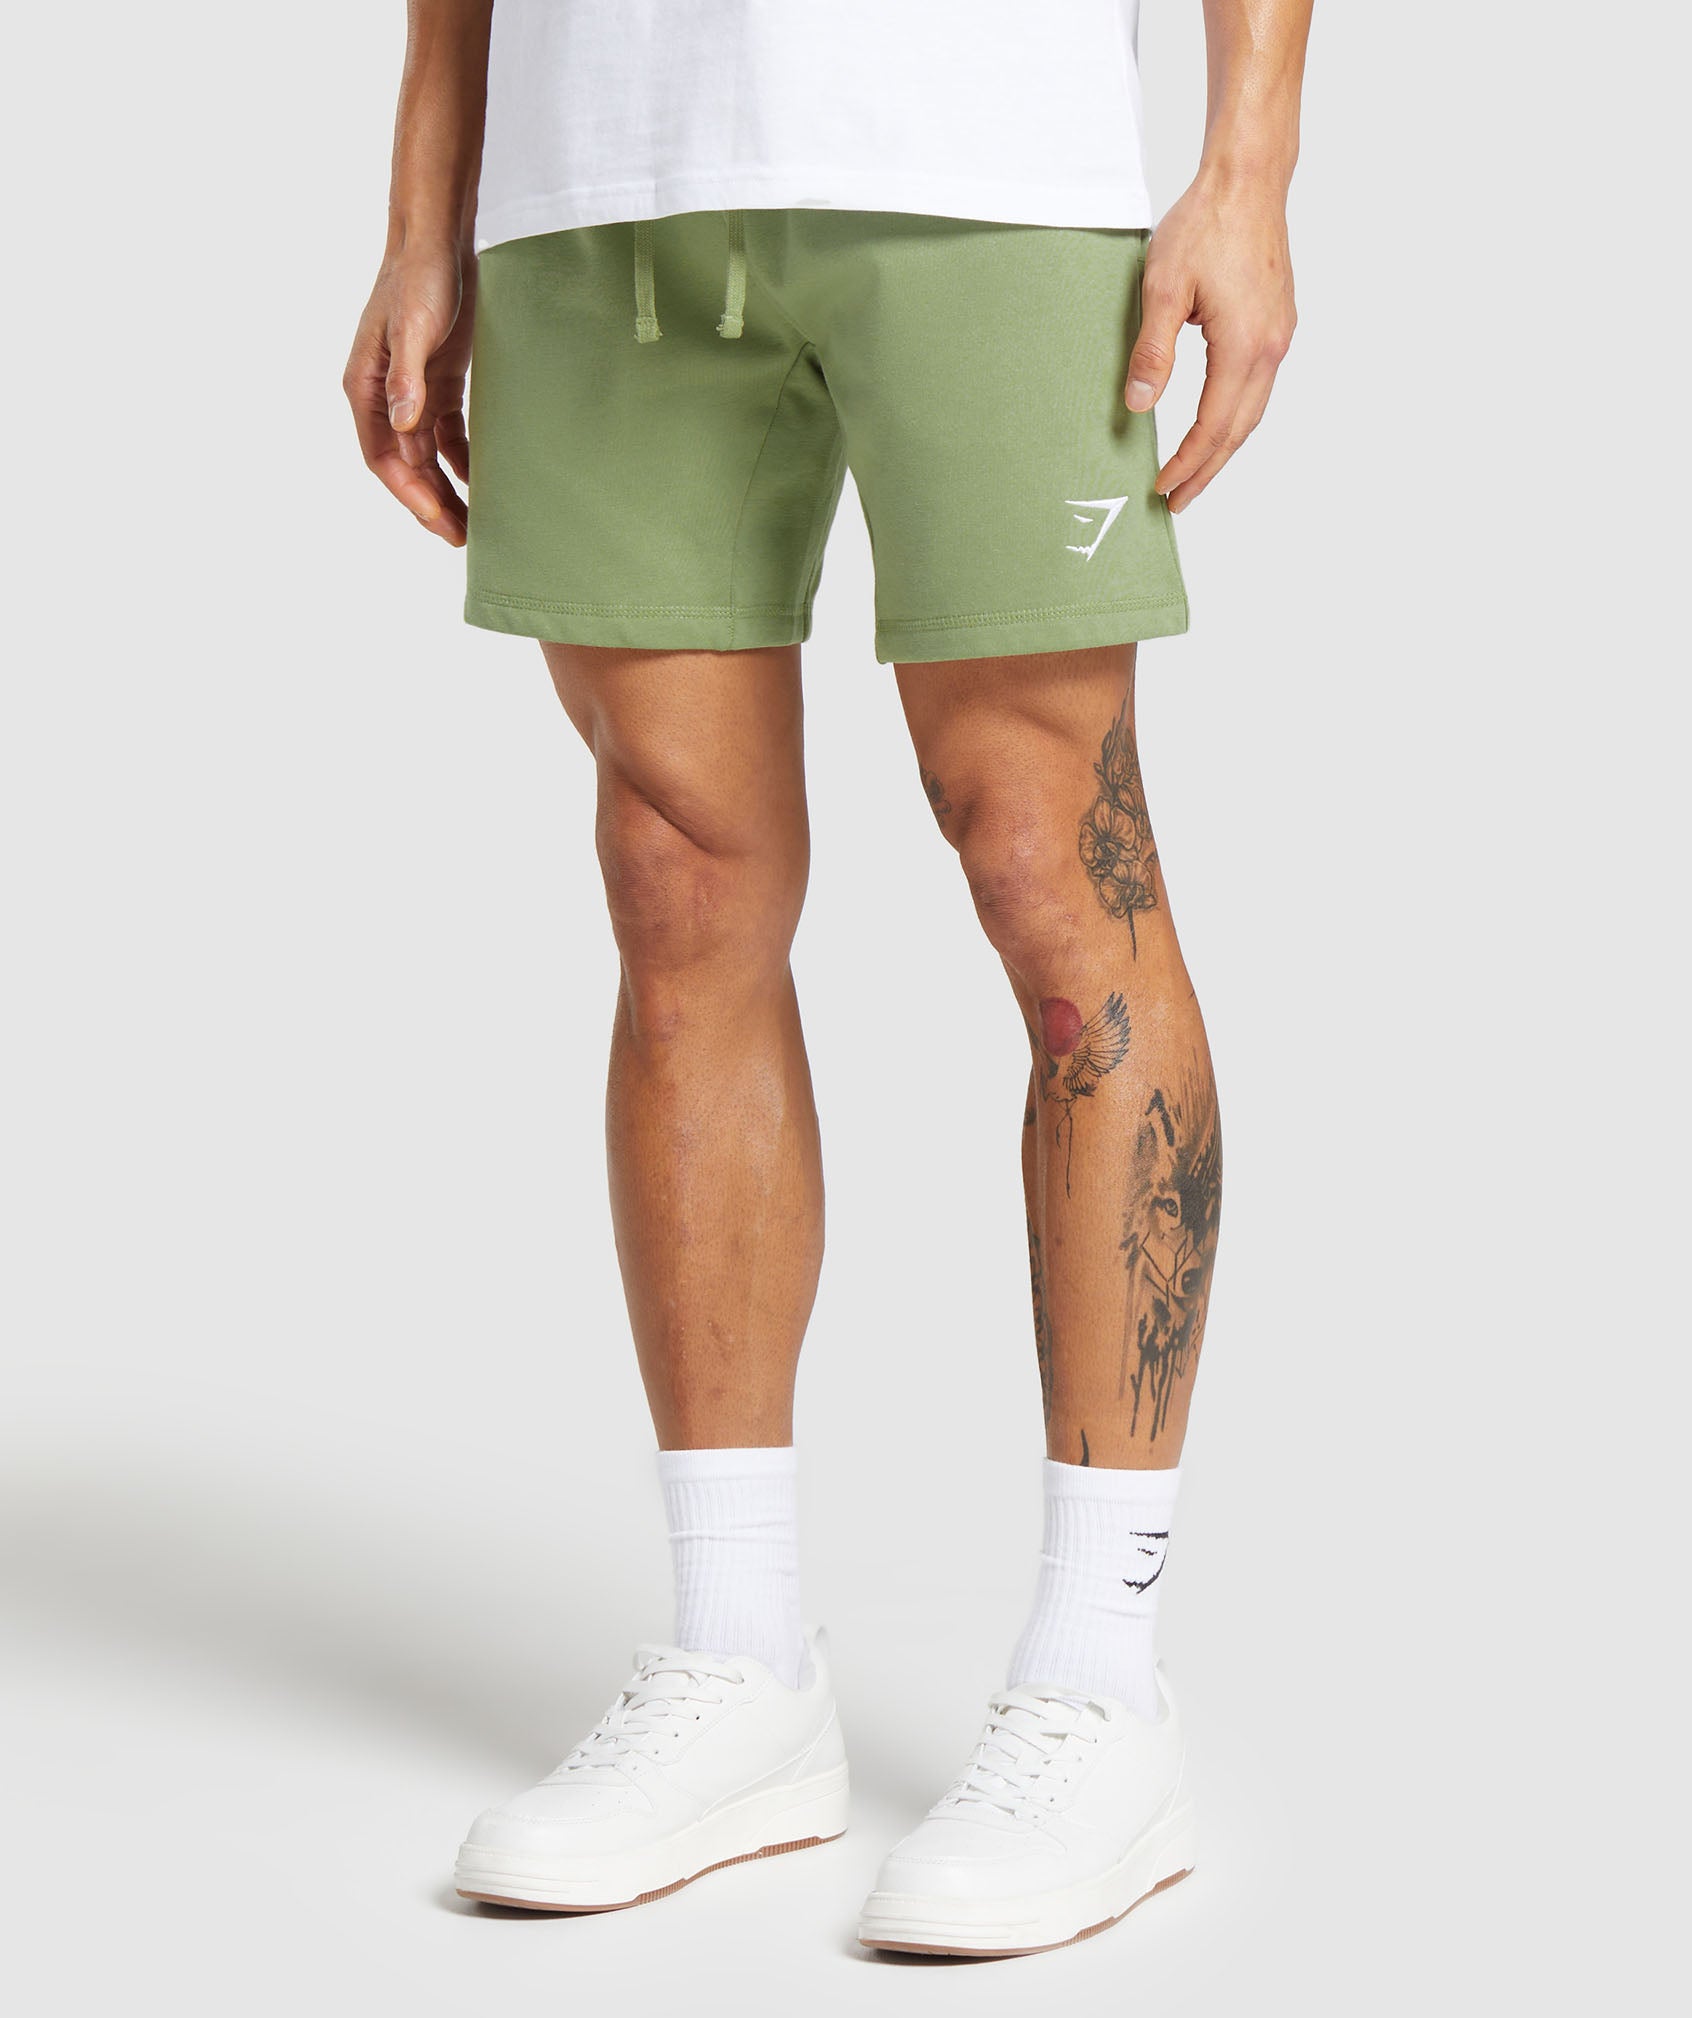 Crest 7" Shorts in Natural Sage Green - view 3